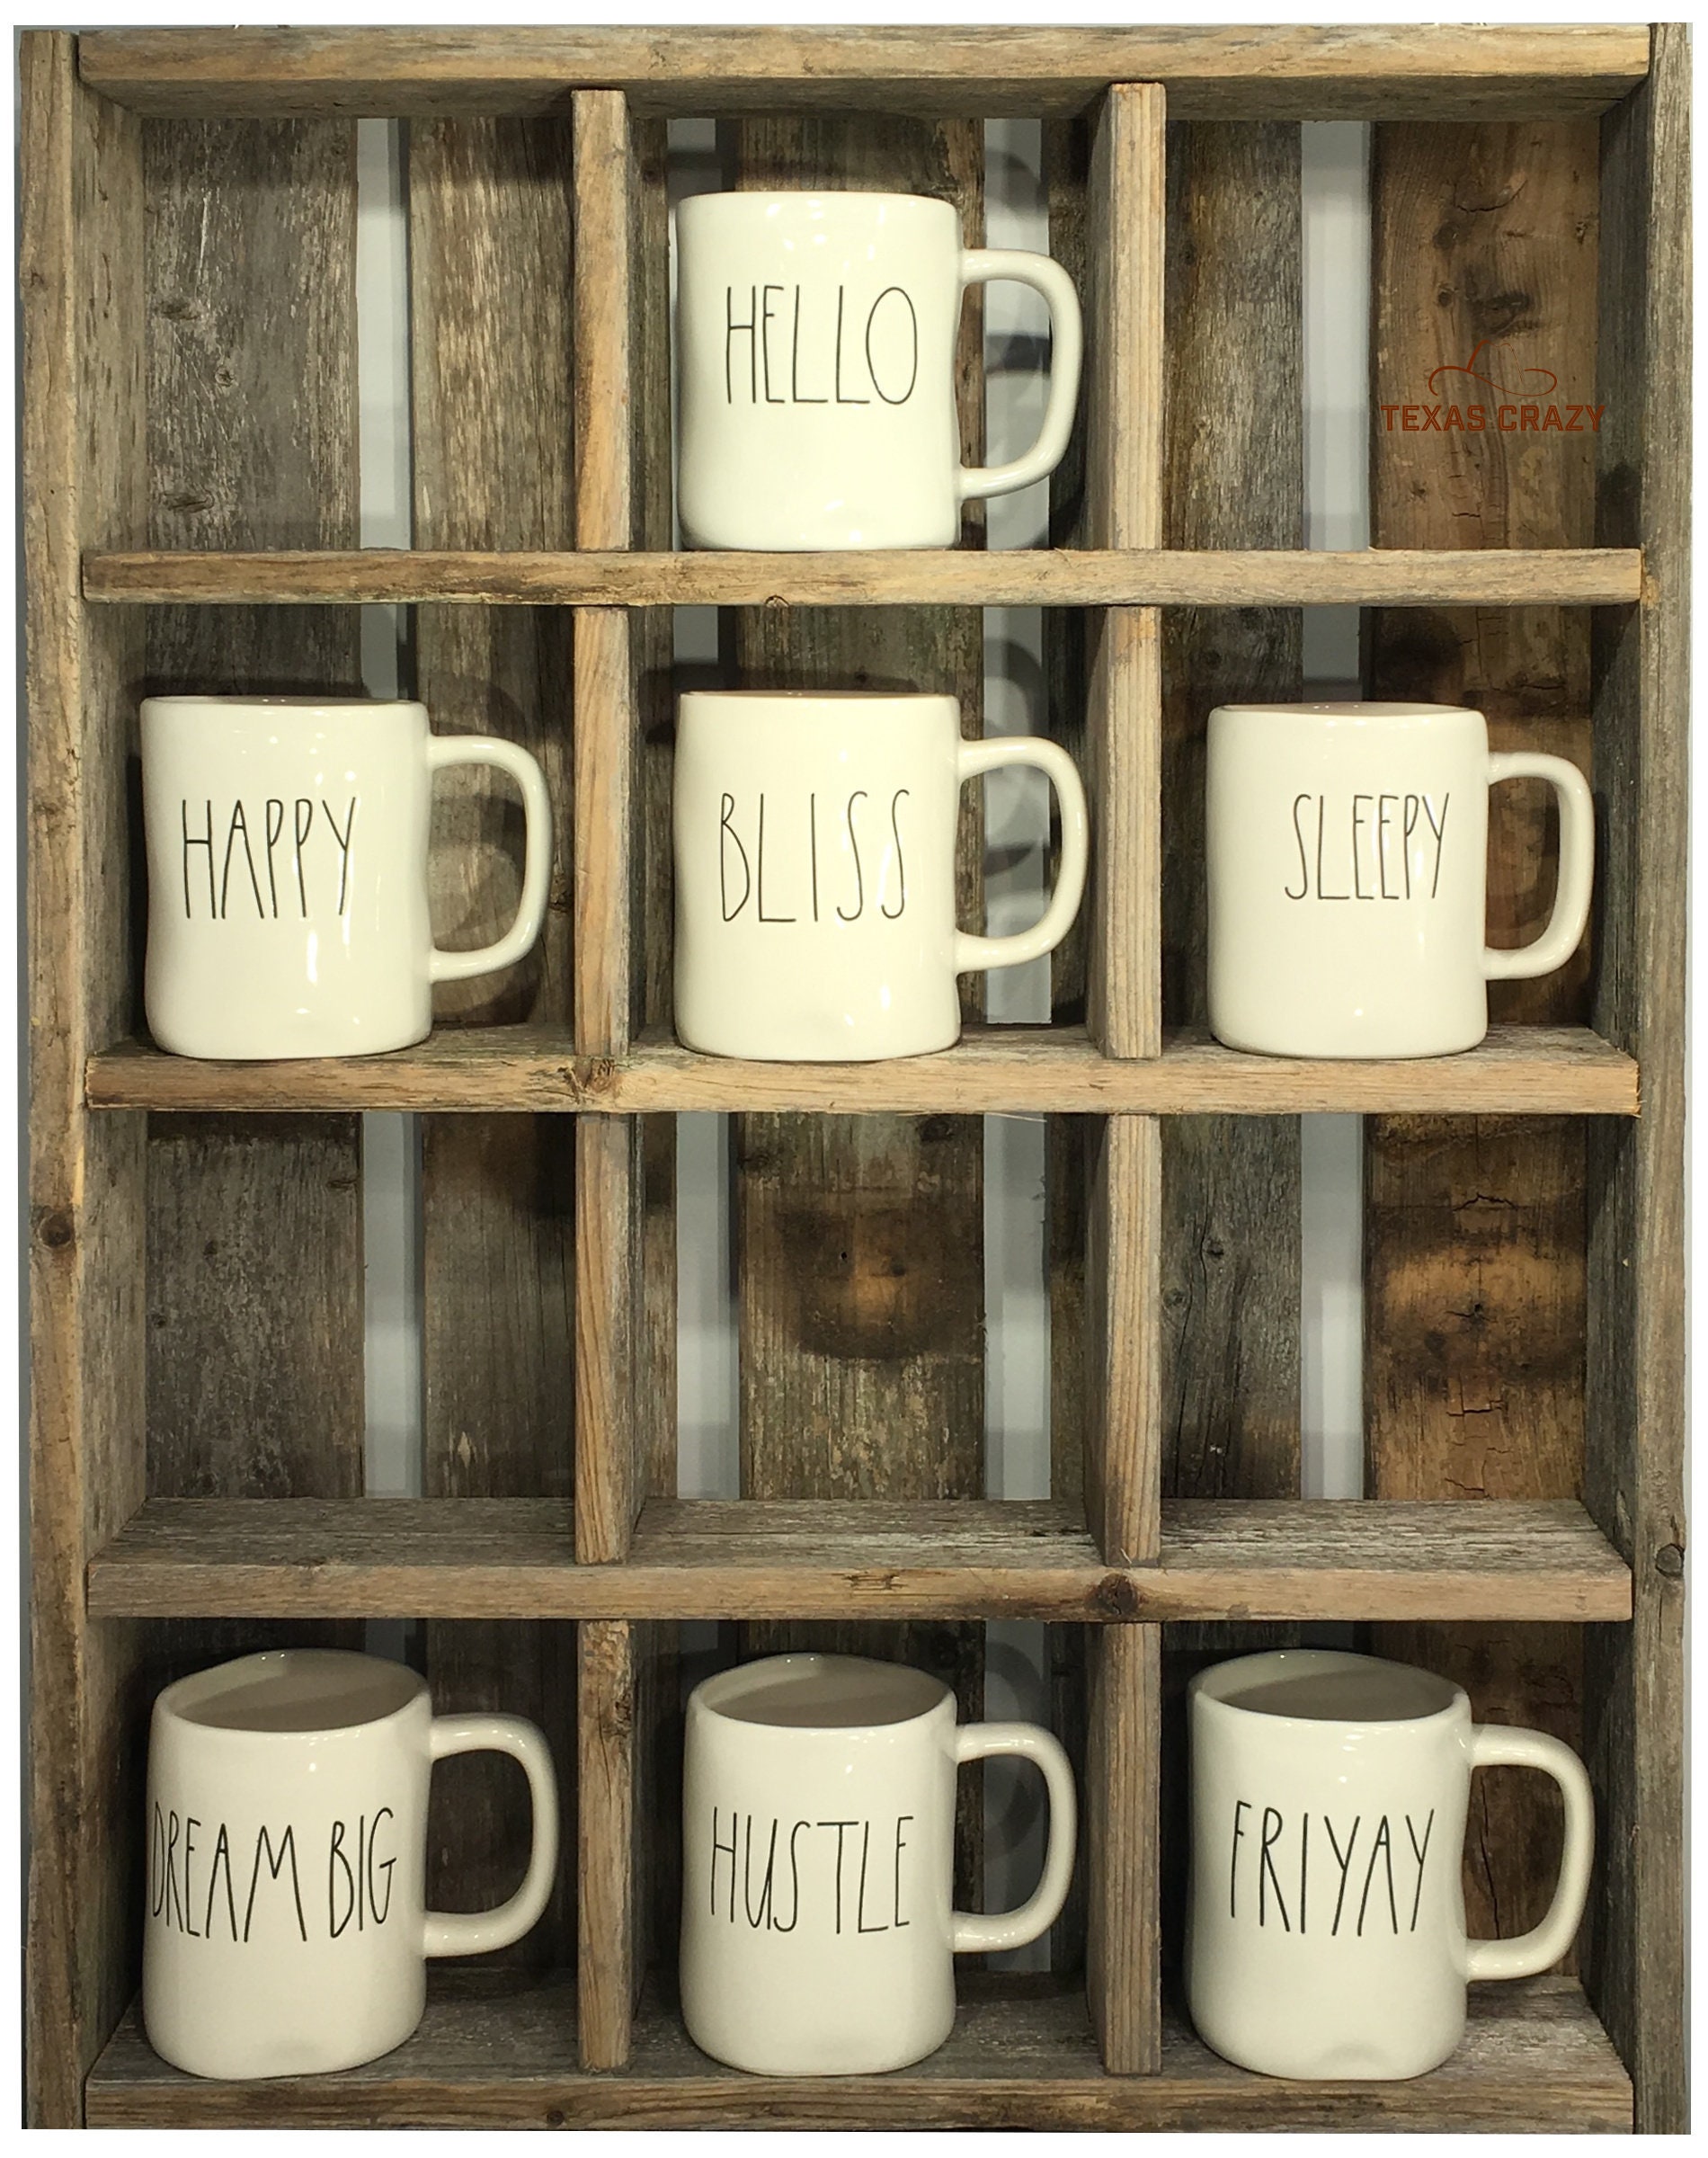 10 Best Coffee Mug Holders in 2023 - Stands and Wall Racks